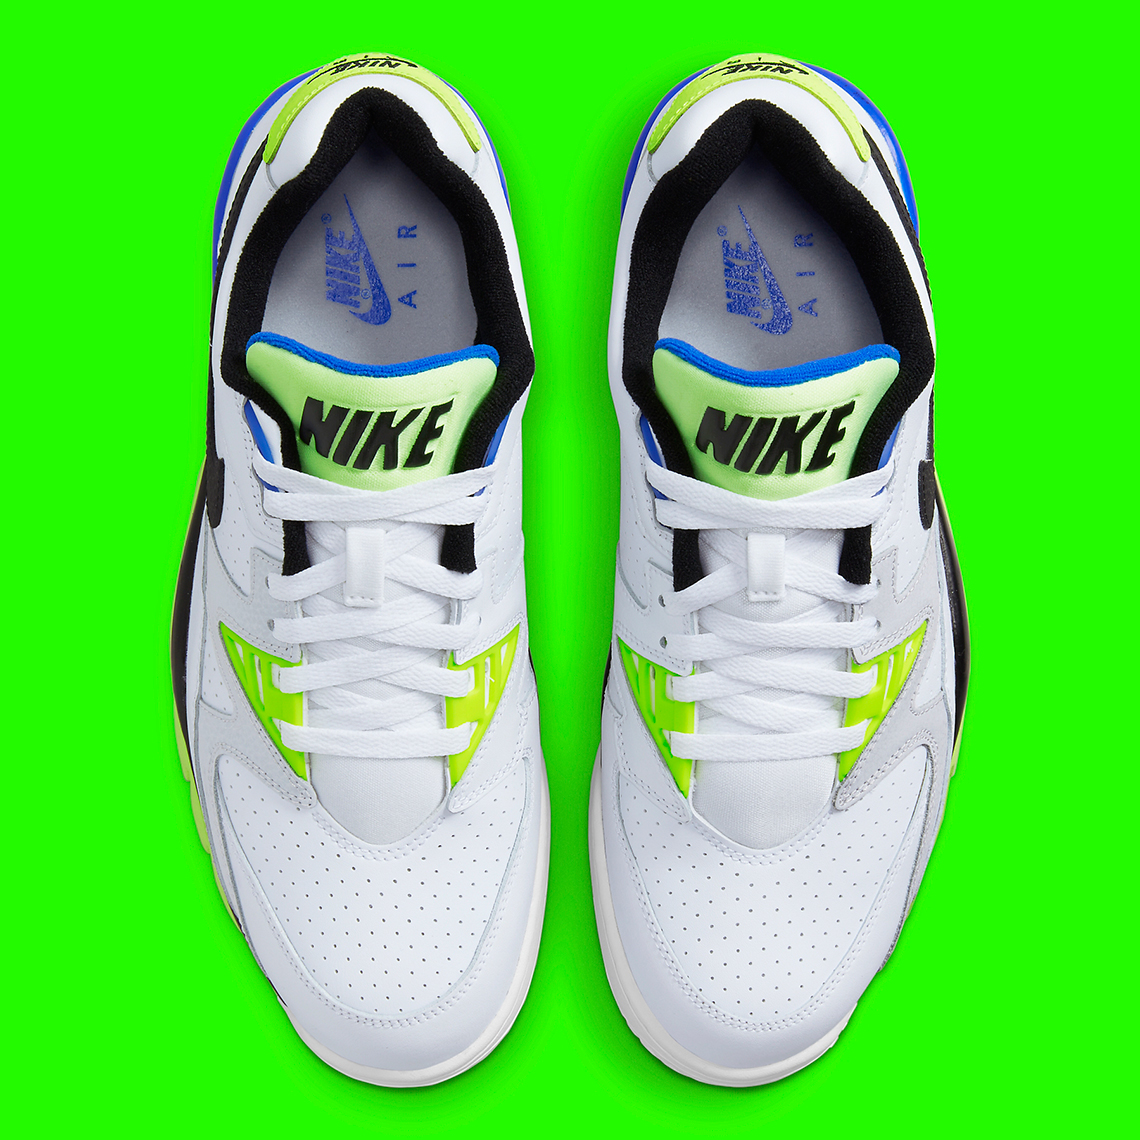 Nike the nike lebron 12 ext inspired by the air zoom generation wheat White Black Volt Royal Fd0788 100 8